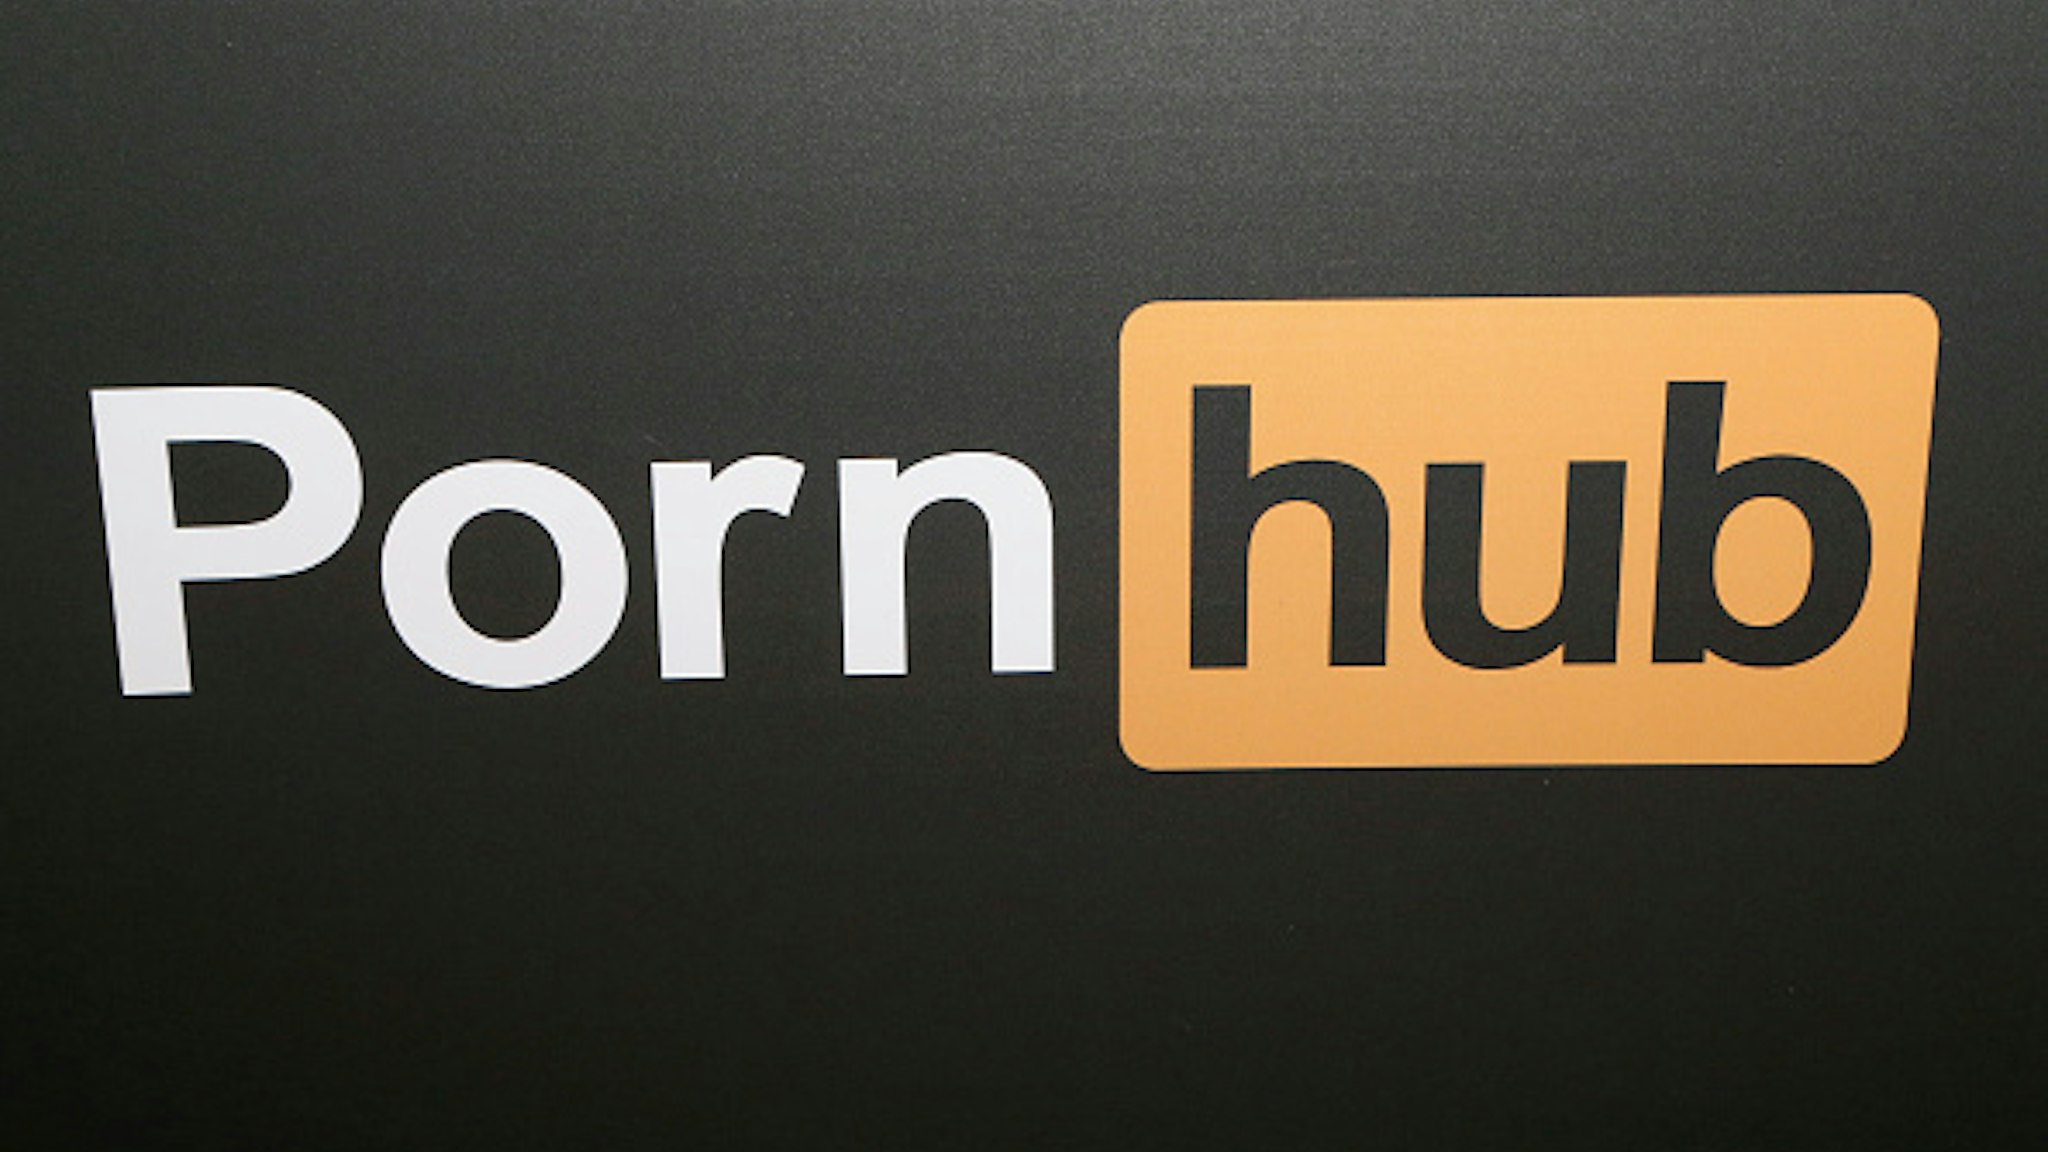 LAS VEGAS, NV - JANUARY 25: A Pornhub logo is displayed at the company's booth during the 2018 AVN Adult Expo at the Hard Rock Hotel &amp; Casino on January 25, 2018 in Las Vegas, Nevada.